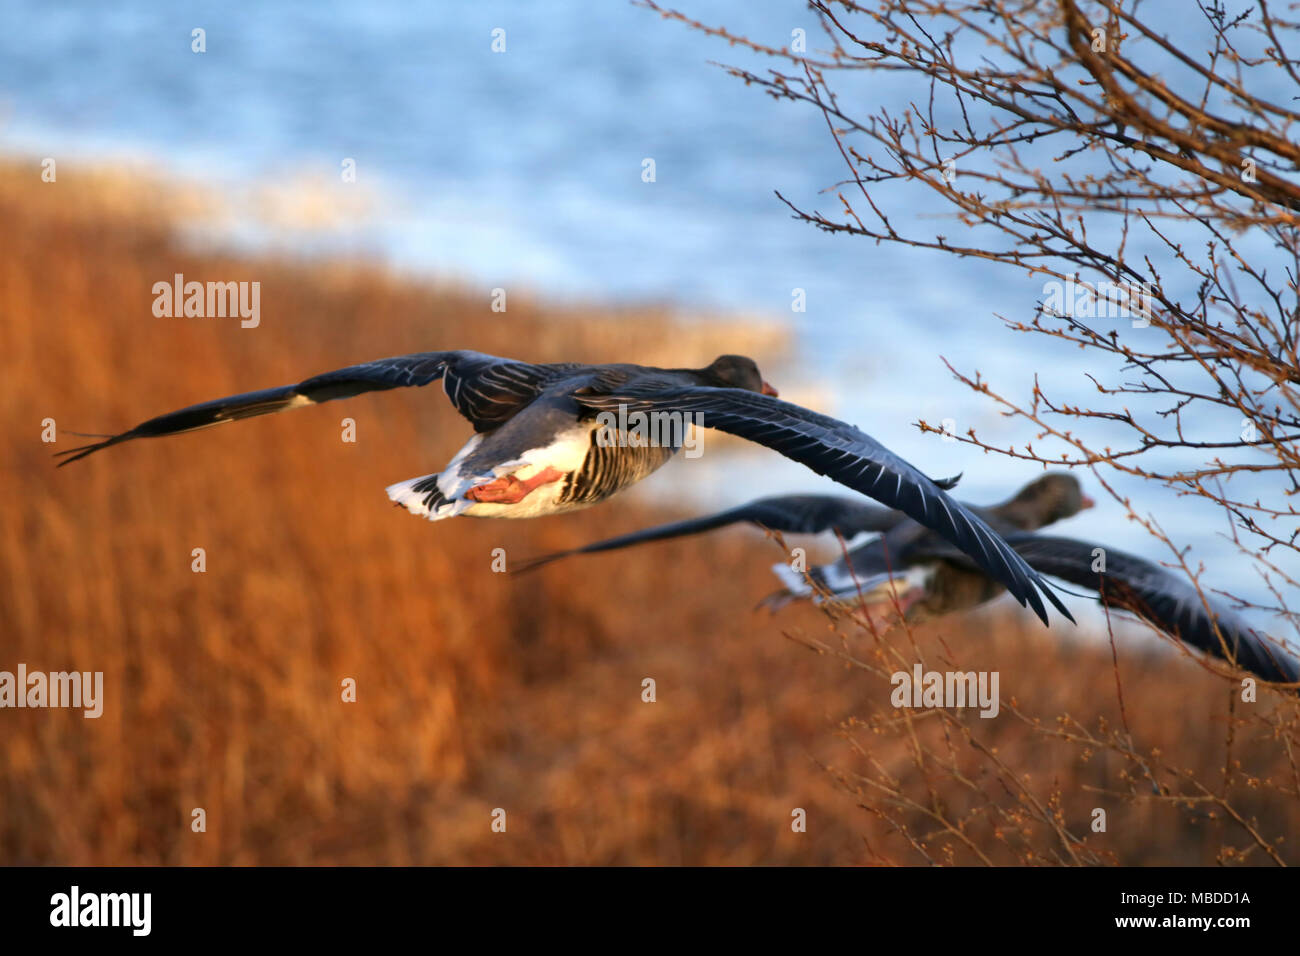 Greylag goose in flight spreading wings towards a lake Stock Photo